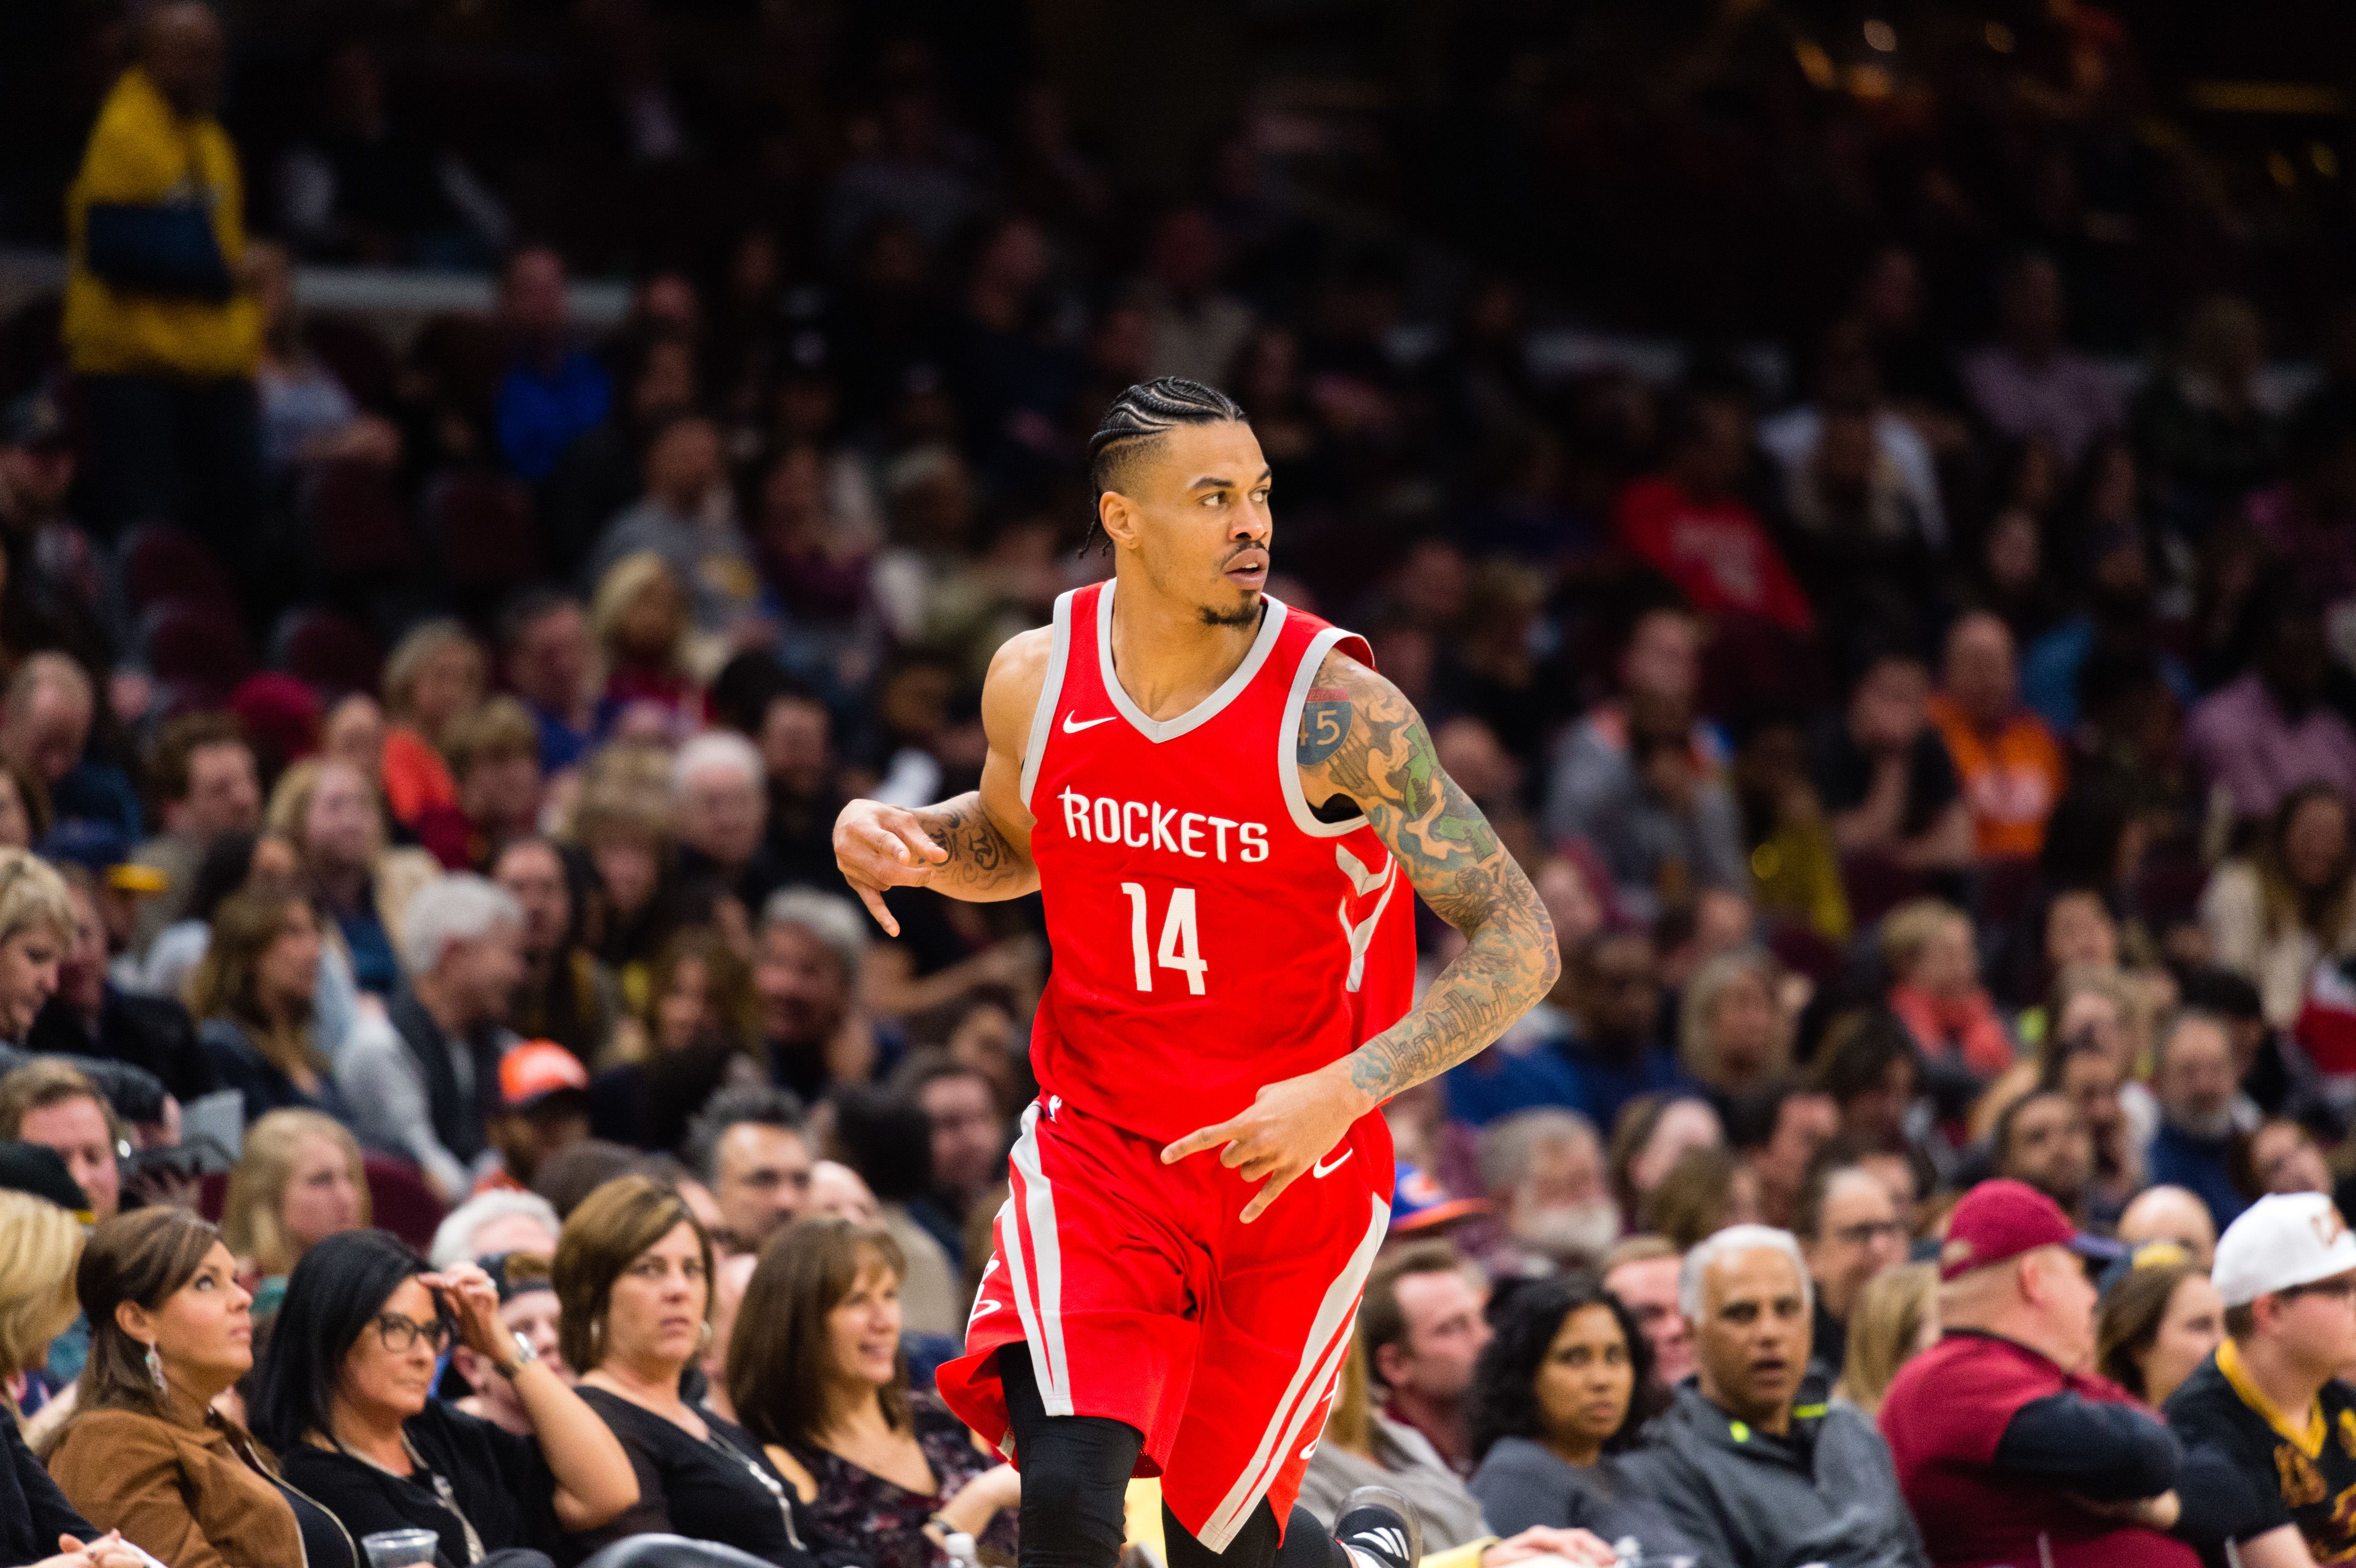 Houston Rockets: Gerald Green continues to provide a boost